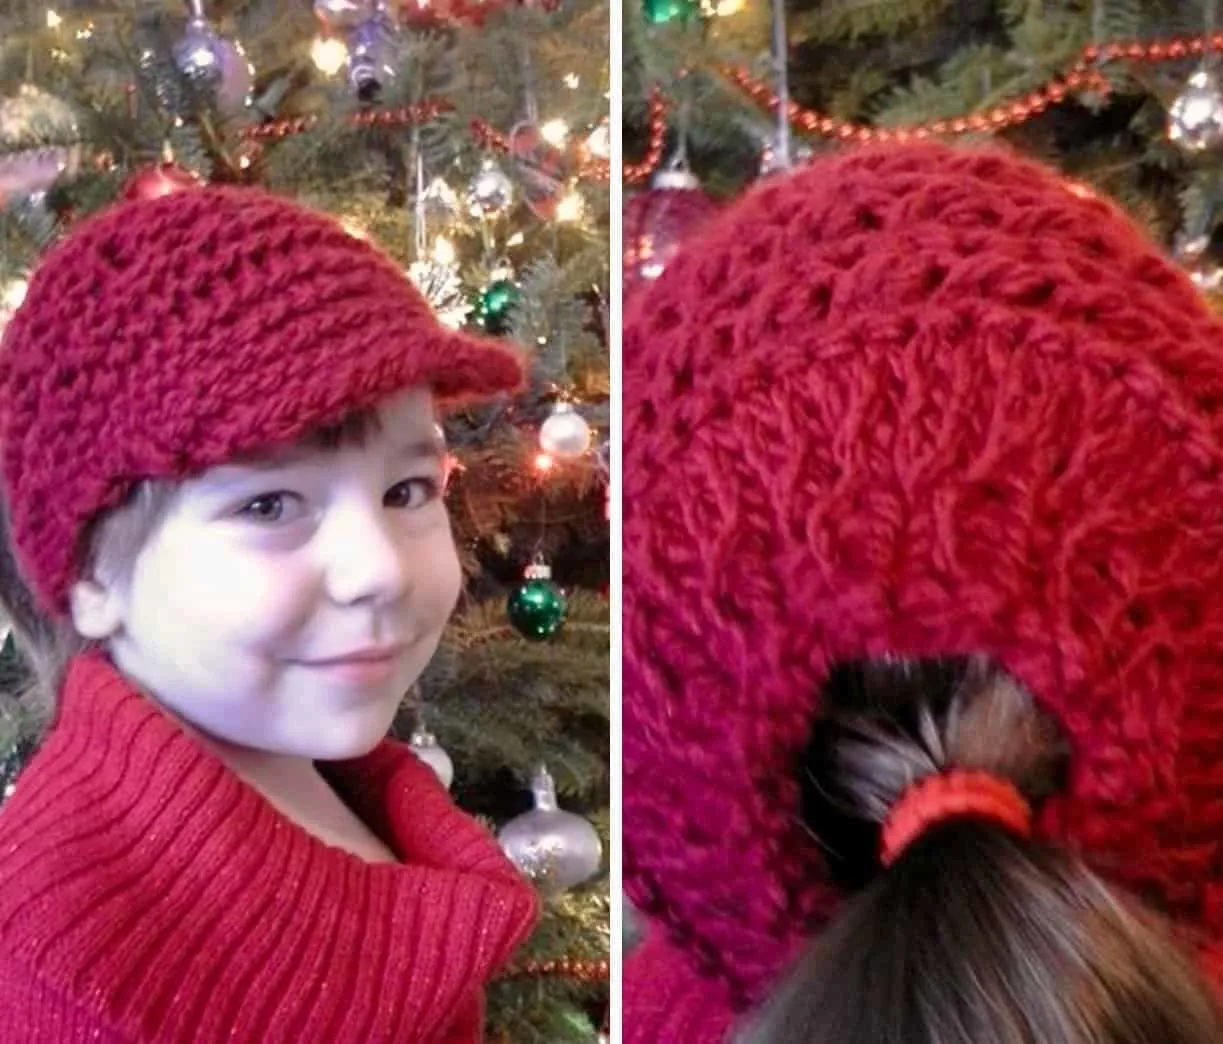 Messy Bun Hats Plus!: 10 Easy & Stylish Projects [Book]